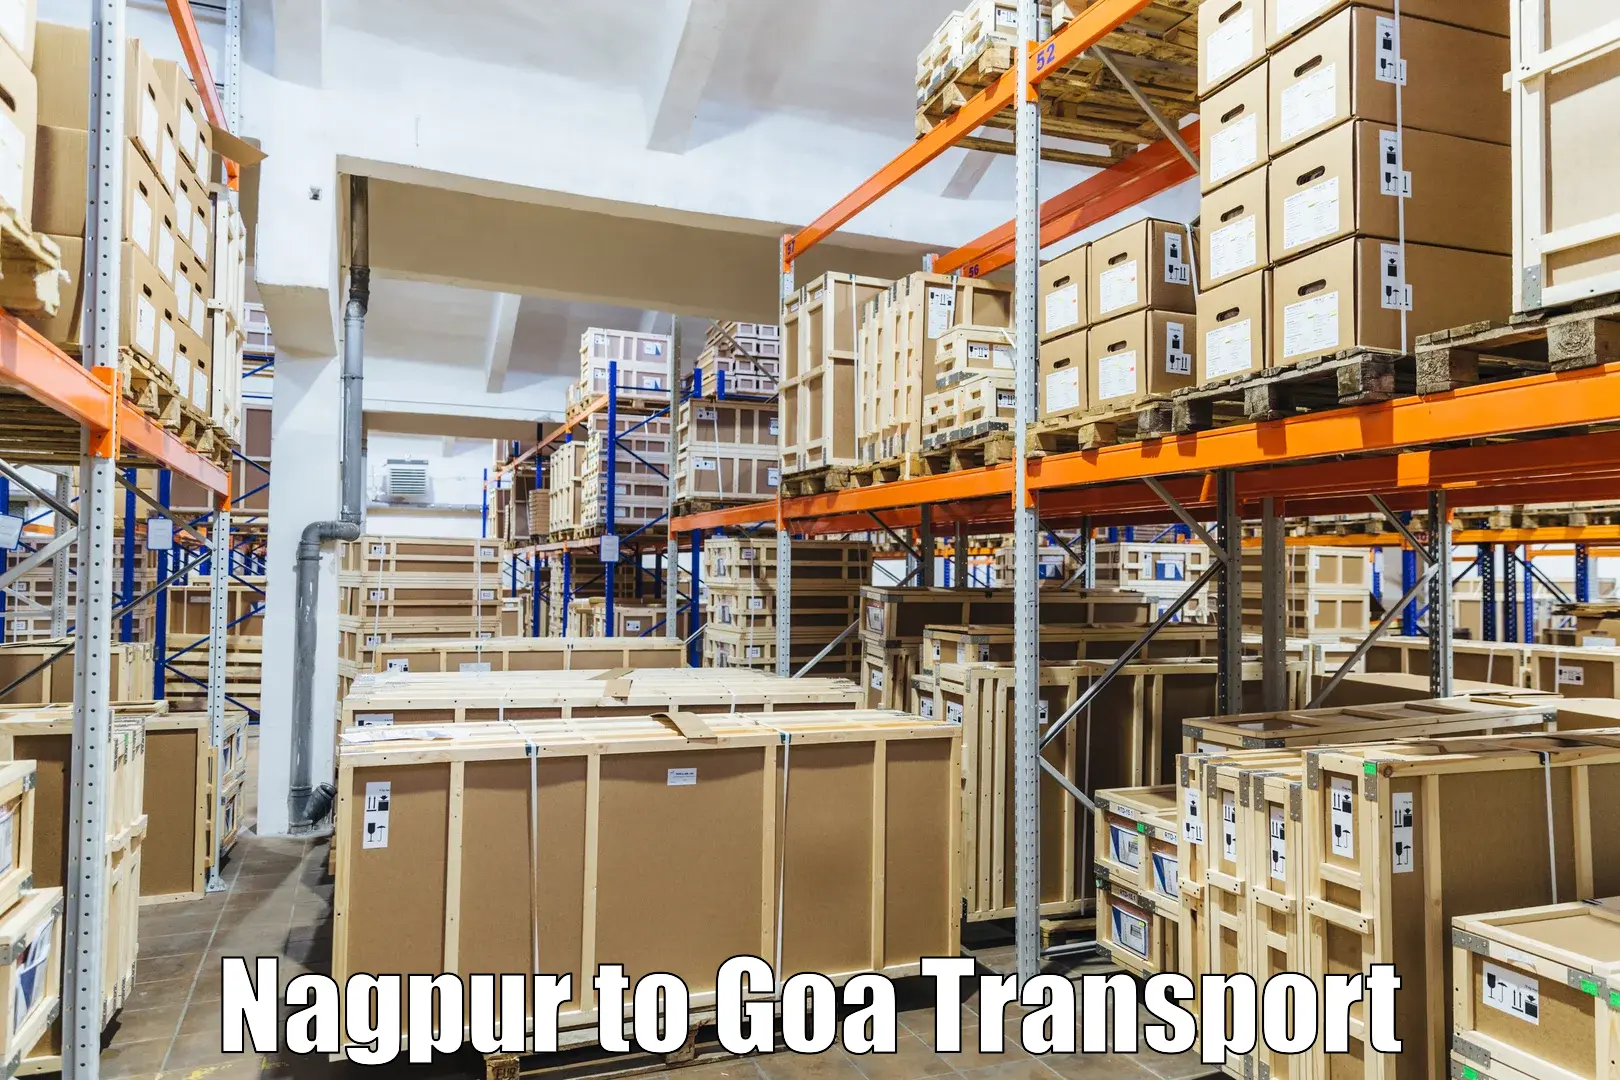 Delivery service Nagpur to South Goa